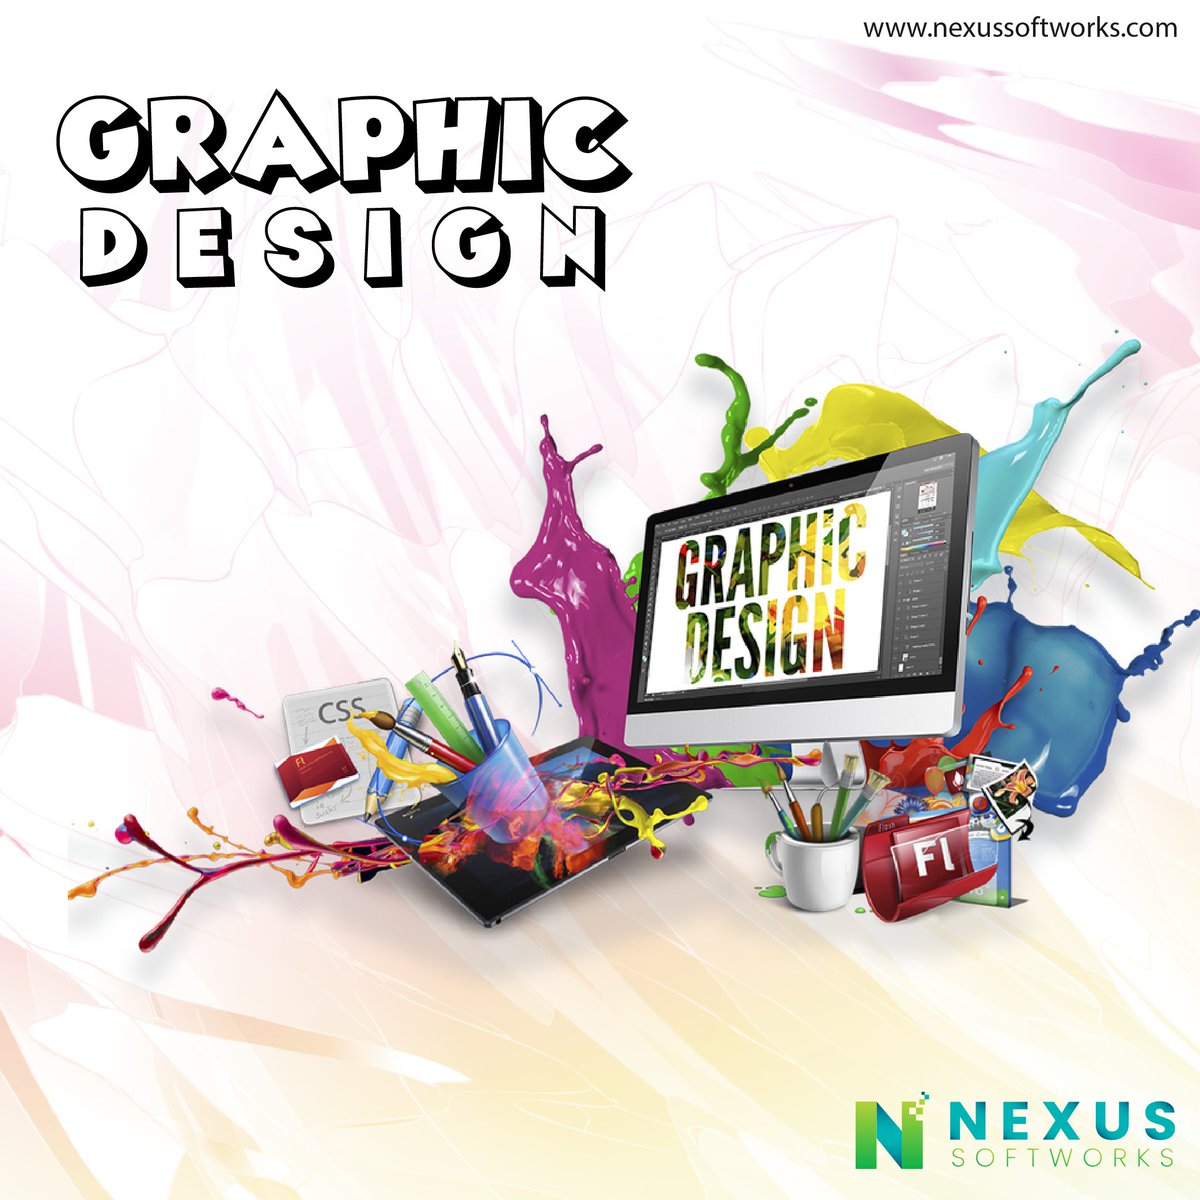 Graphic designers typically use software such as Adobe Photoshop, Illustrator, and InDesign to create their designs, although there are many other tools and resources available.
.
.
#nexussoftworks #designideas #graphicdesign #adobephotoshop #designing 🎨🪈🎯